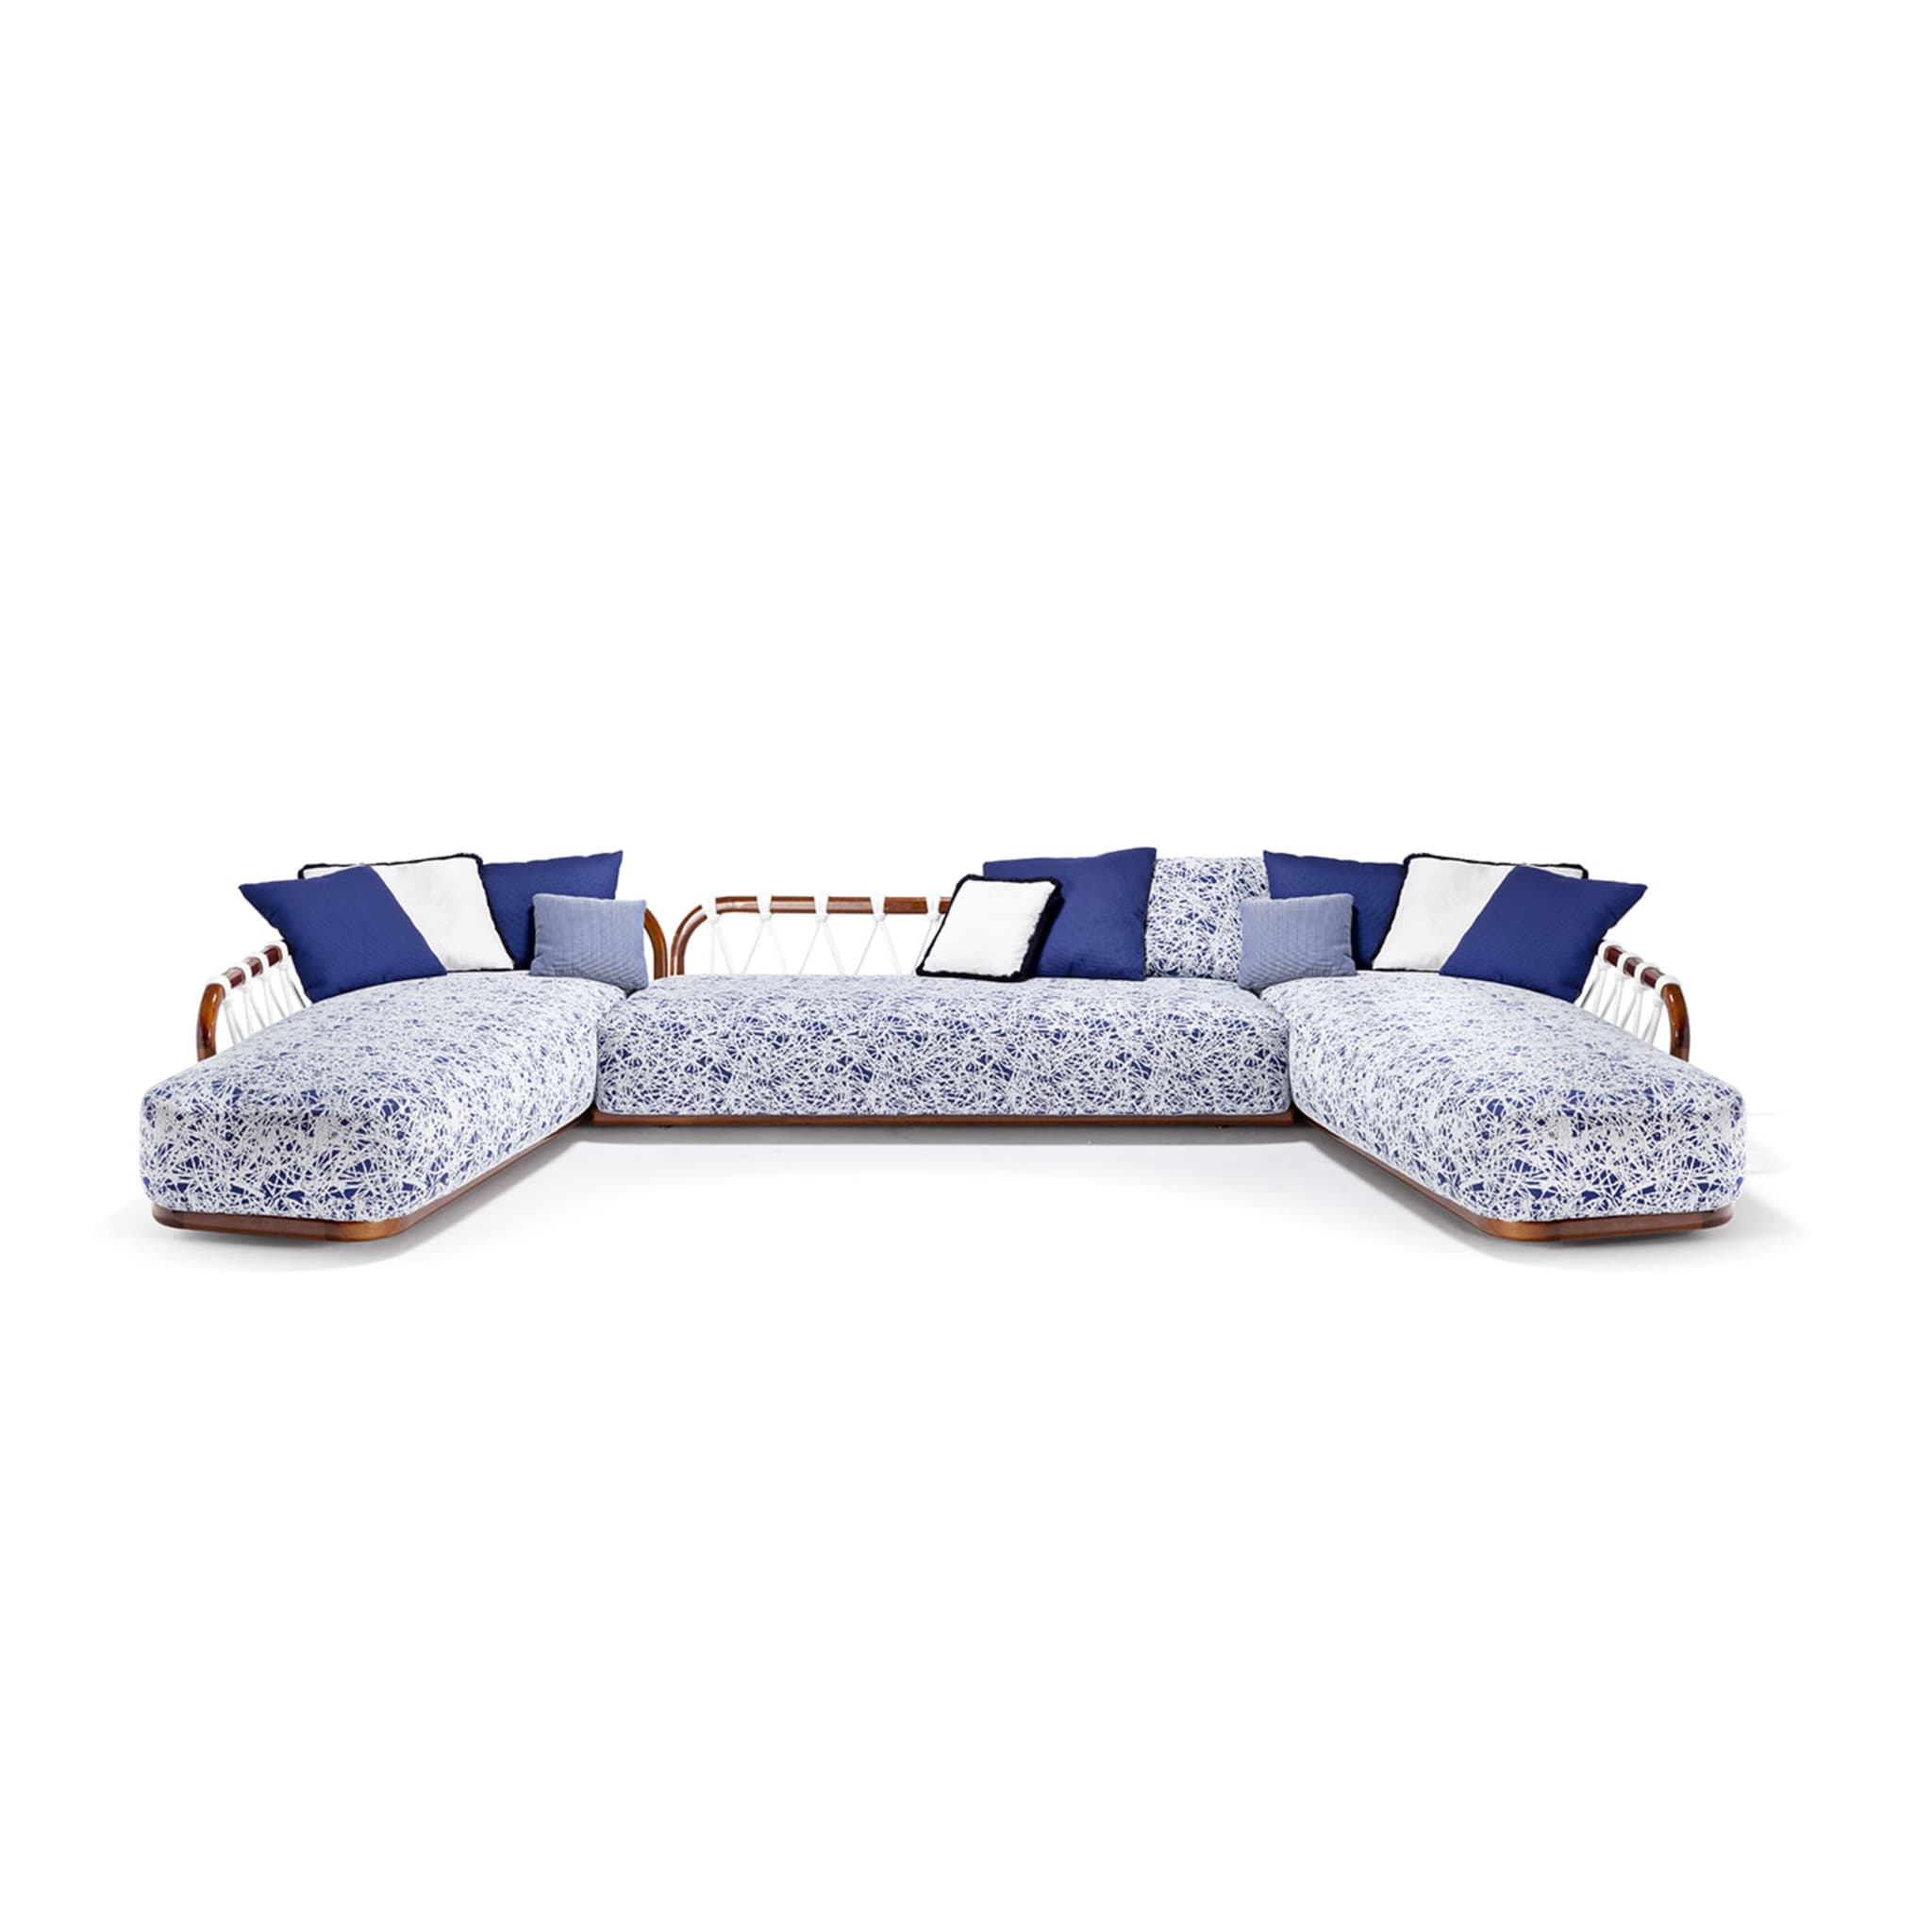 Sunset Basket Blue & White End Element by Paola Navone & AMP - Alternative view 5